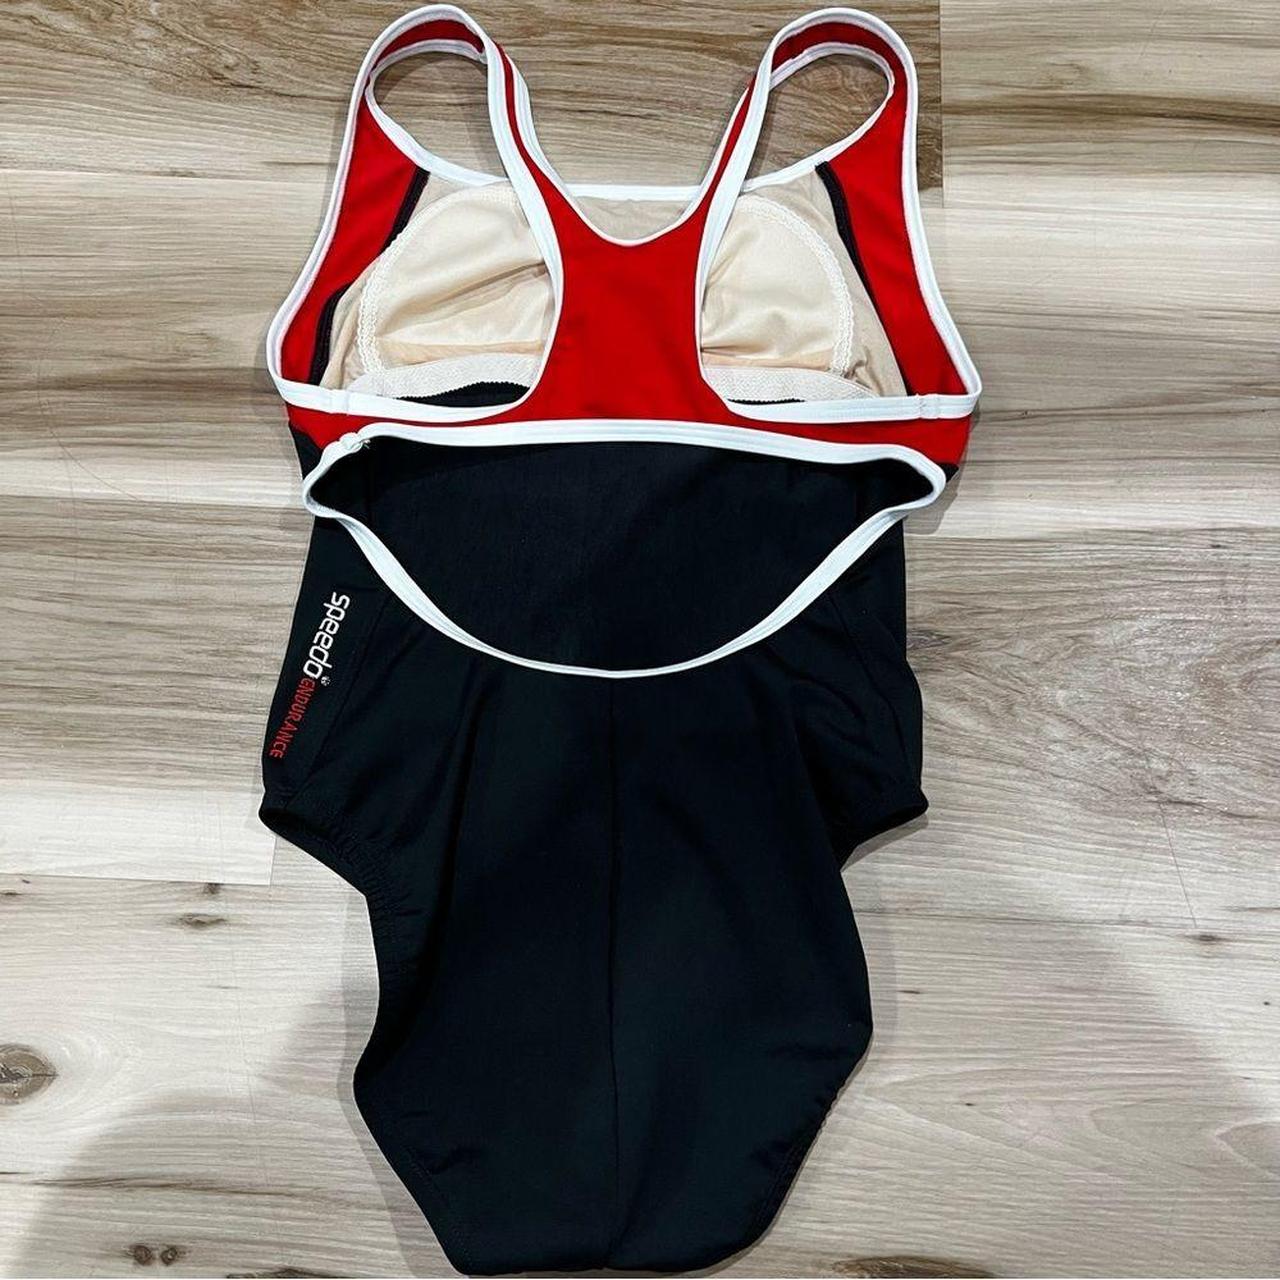 Red speedo one piece athletic swimsuit. Never used - Depop